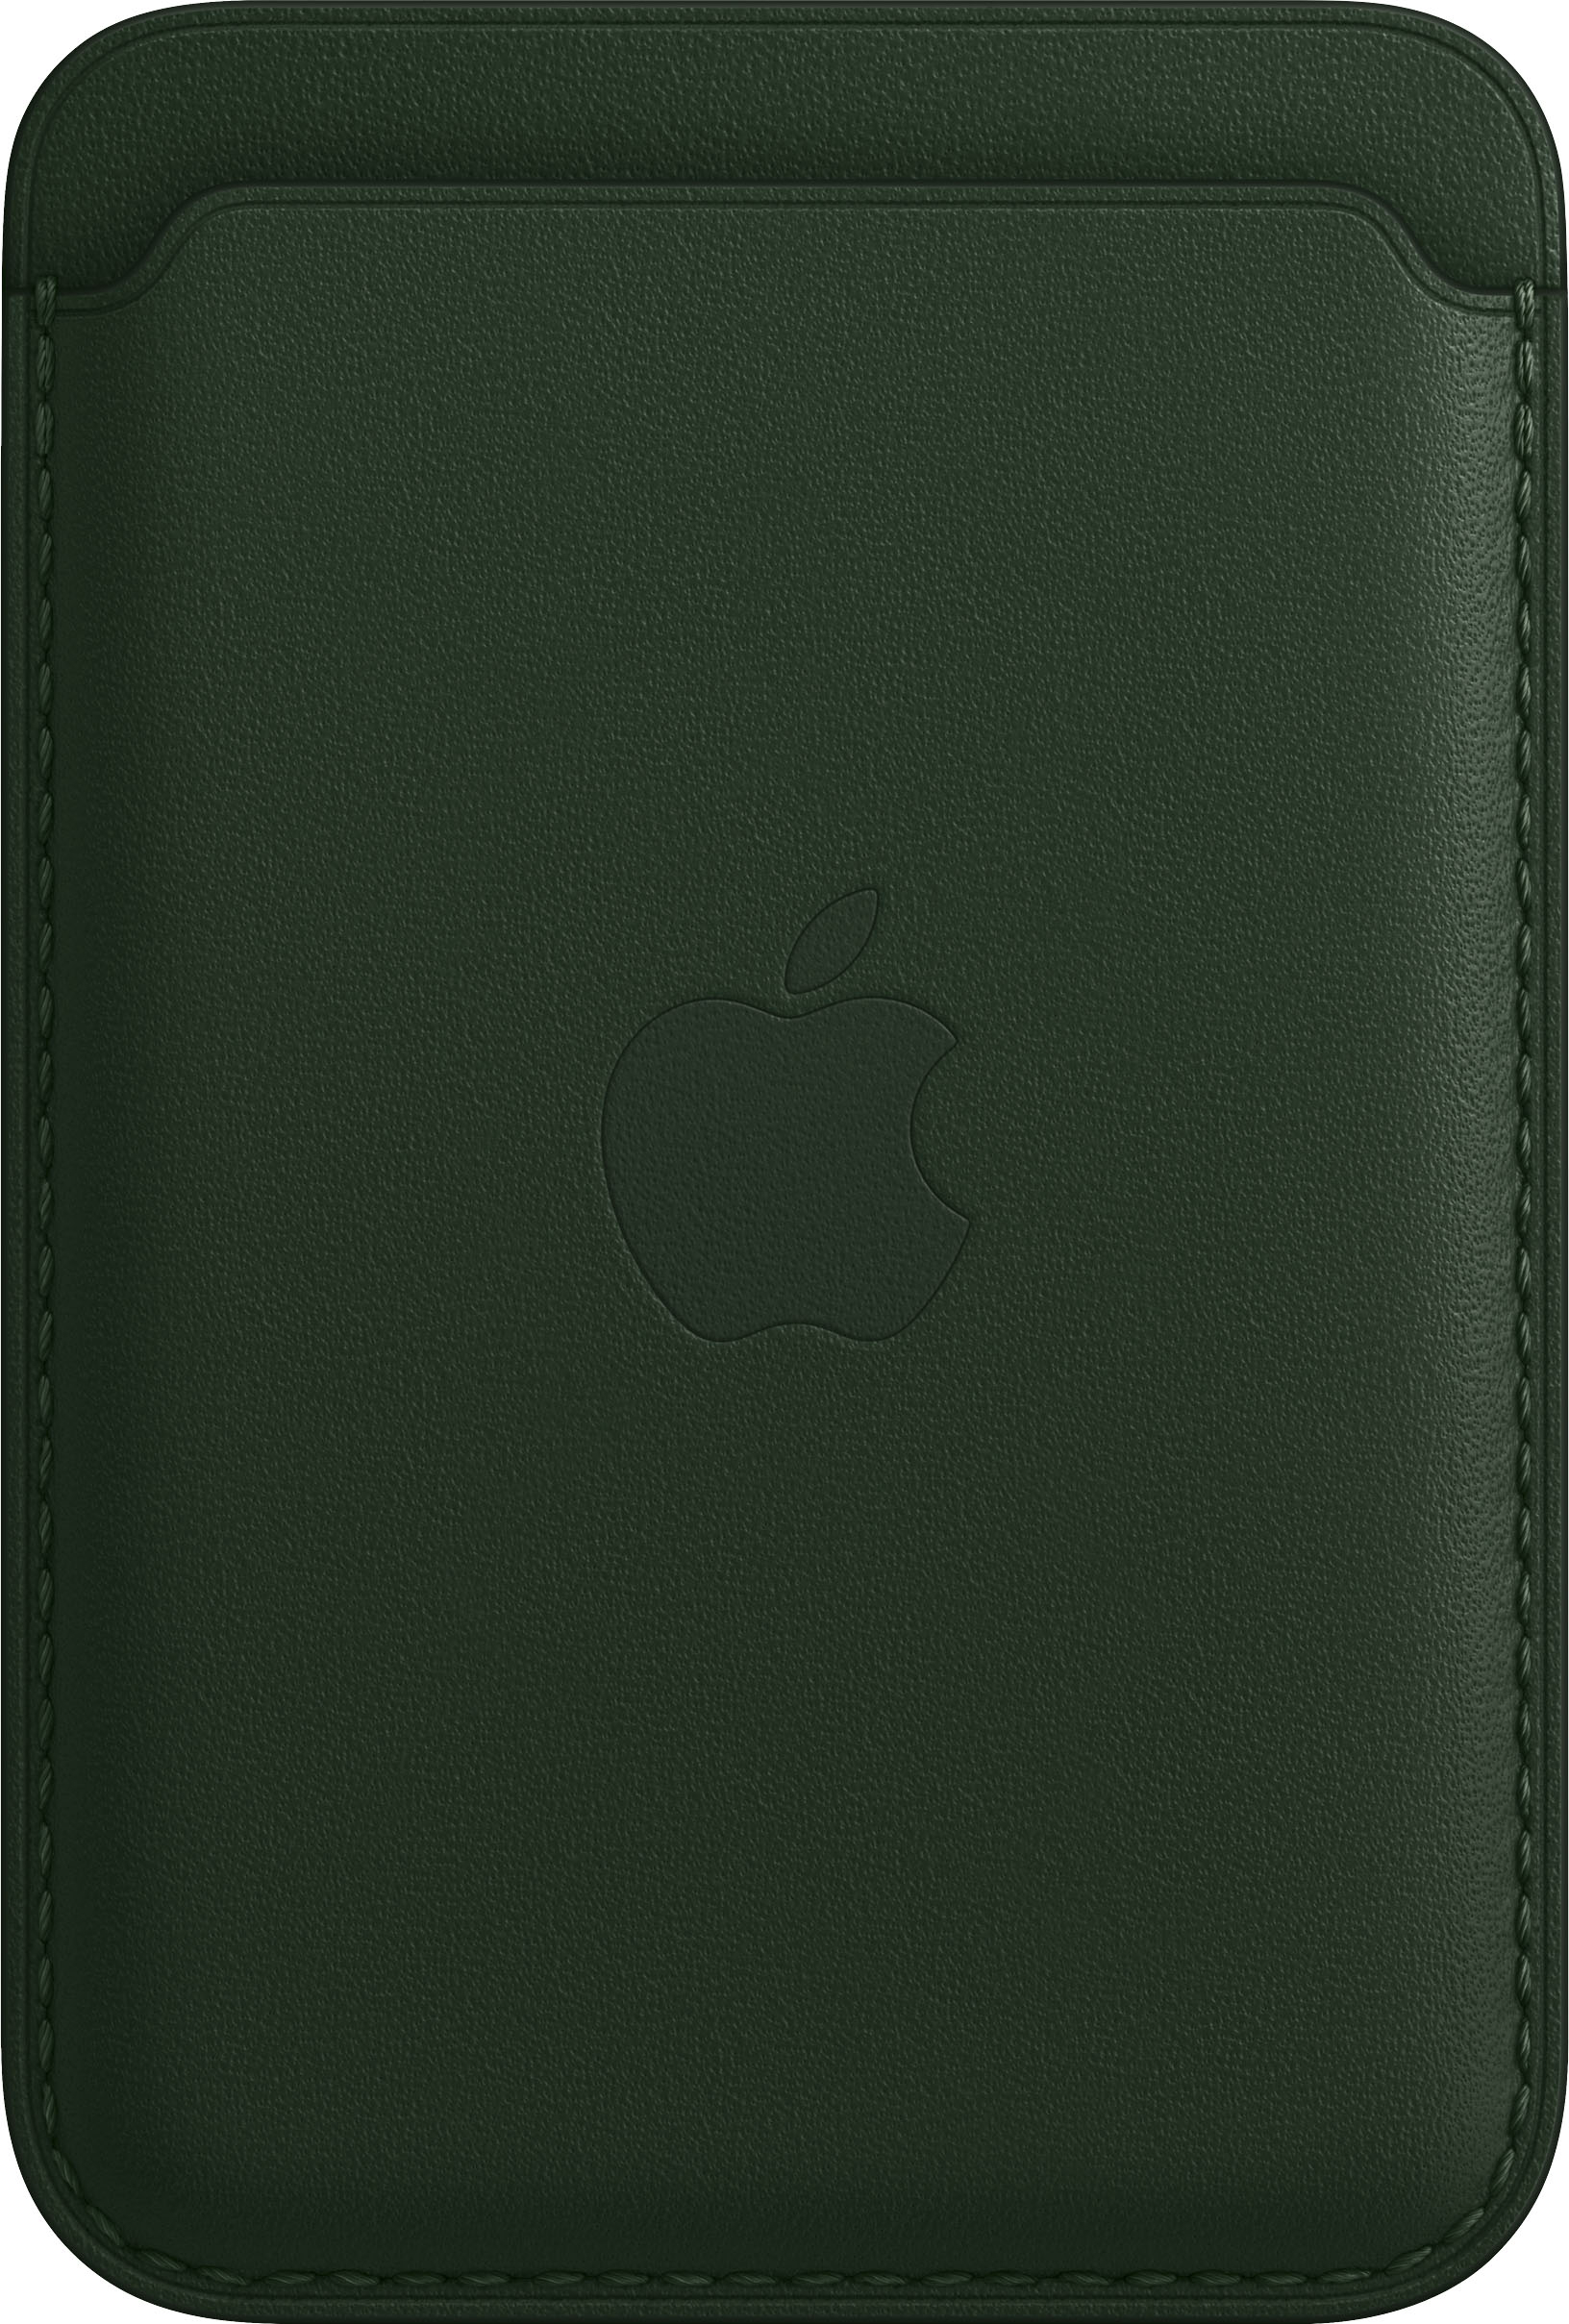 Official Apple iPhone 12 mini Leather MagSafe Wallet - Green